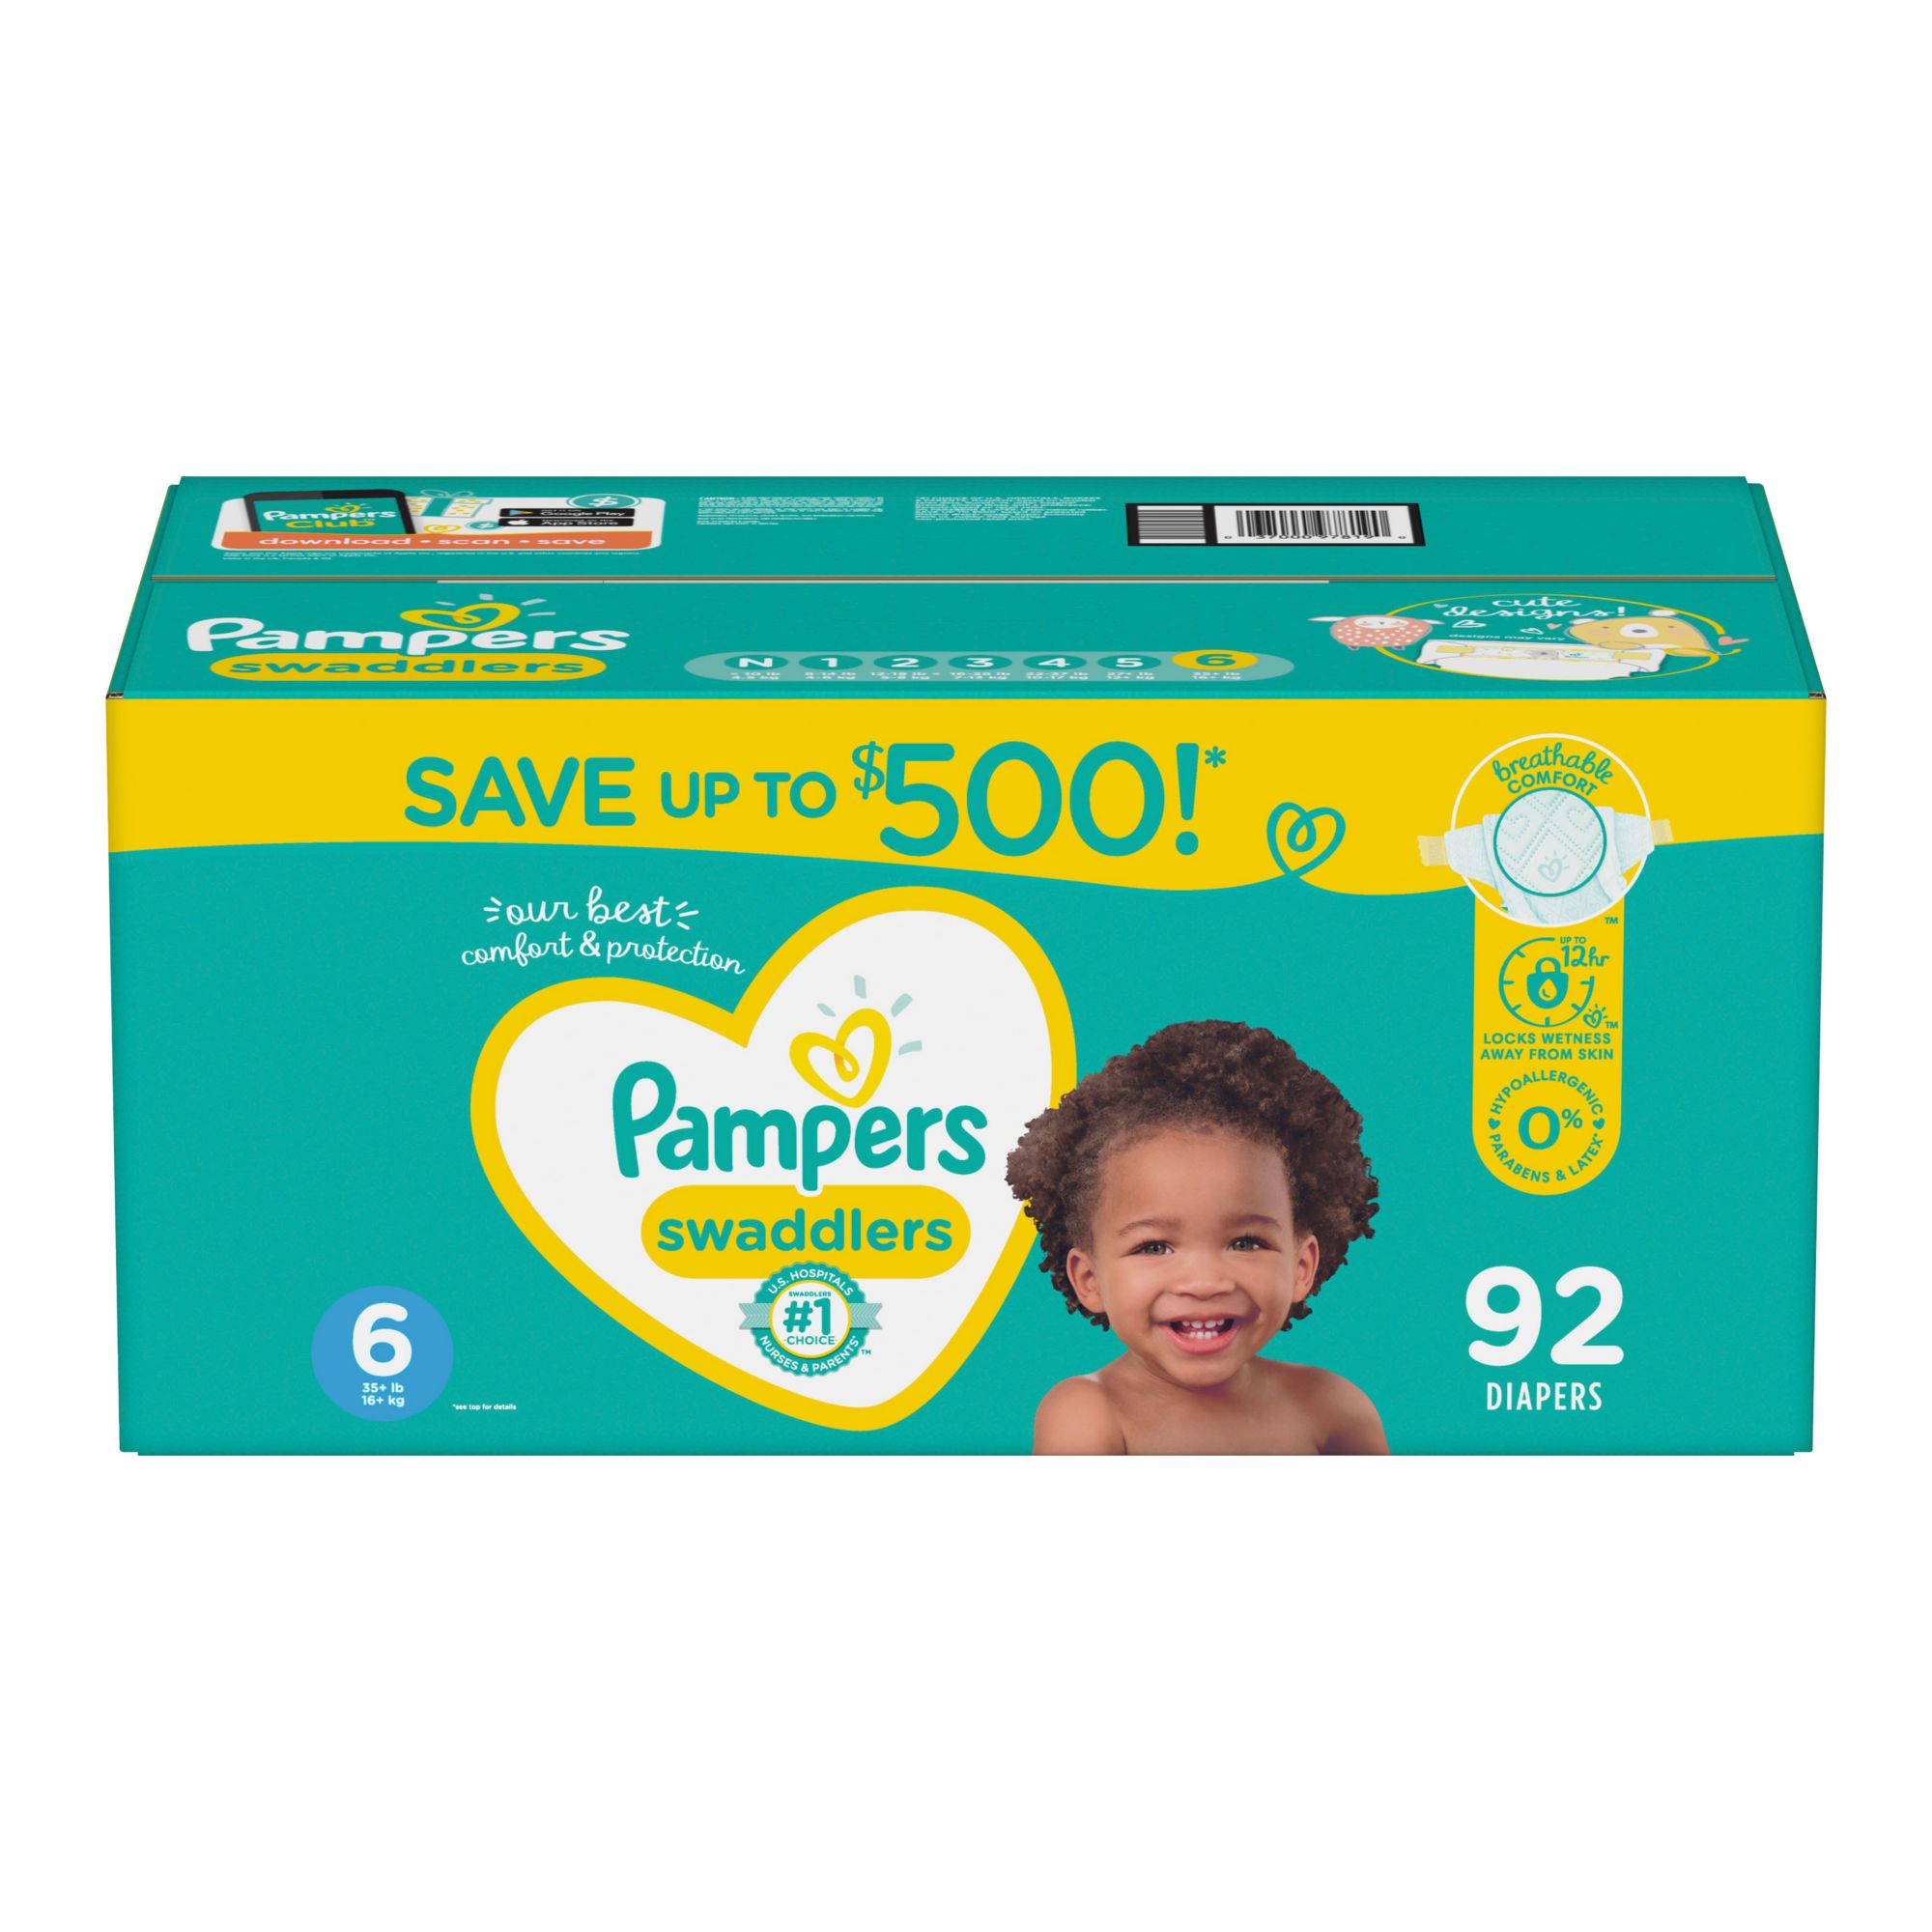 pampers diapers price